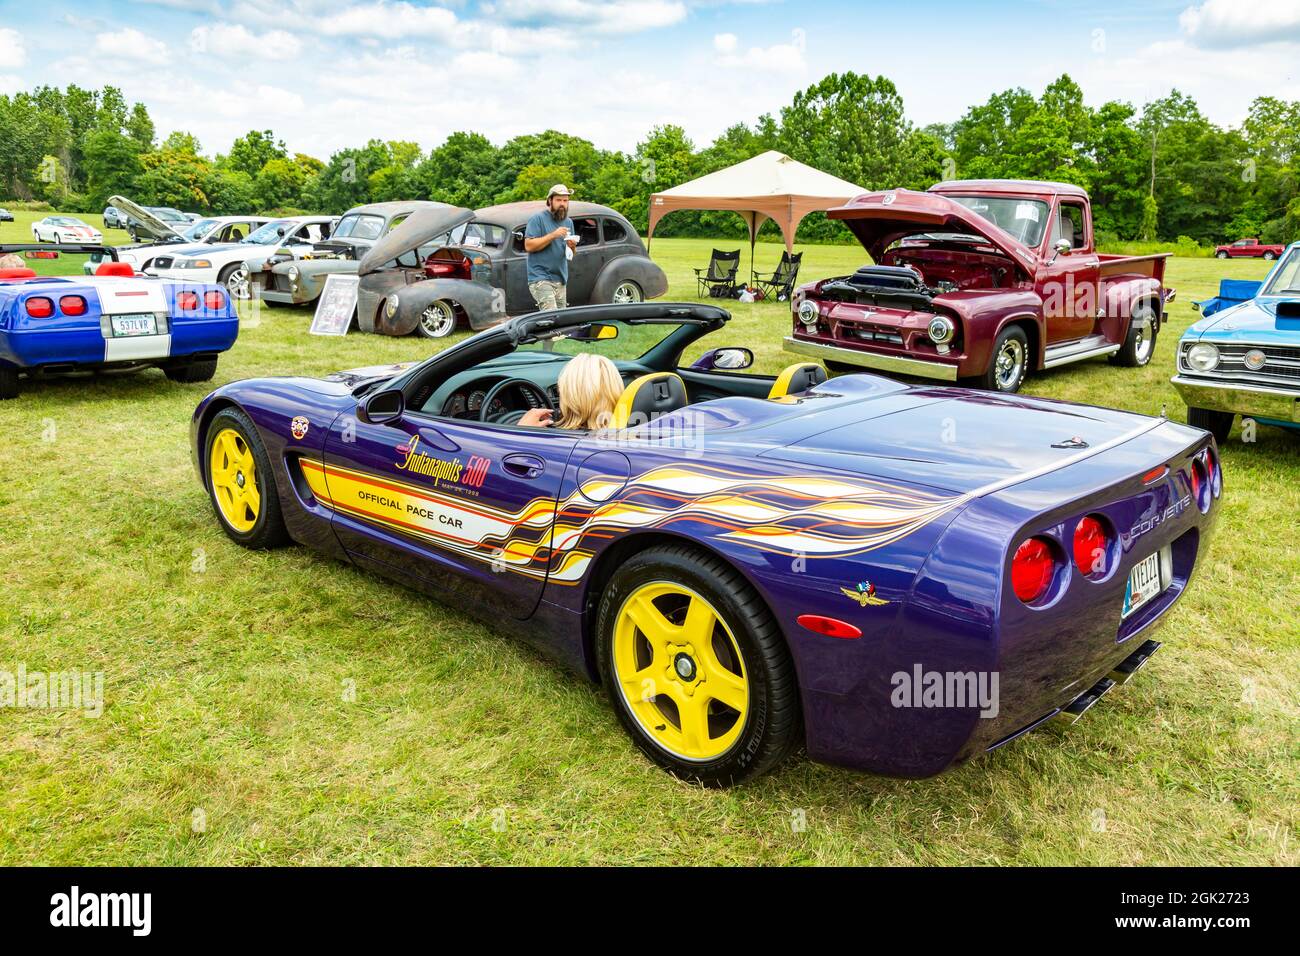 A purple 1998 Chevrolet C5 Corvette Indy 500 official pace car at a car show in Fort Wayne, Indiana, USA. Stock Photo